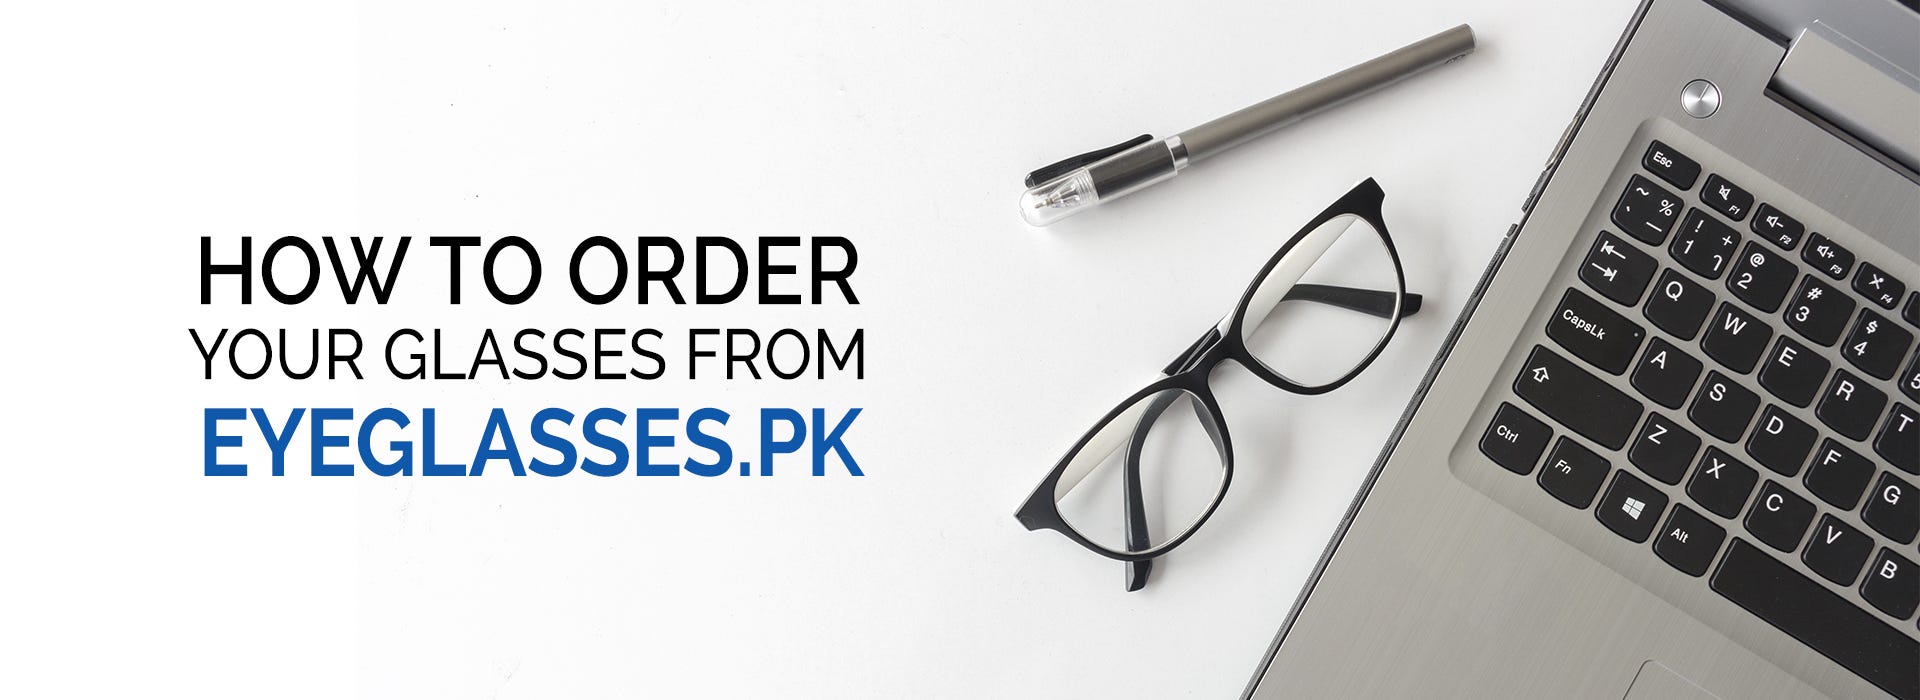 How To Order Your Glasses From Eyeglasses PK